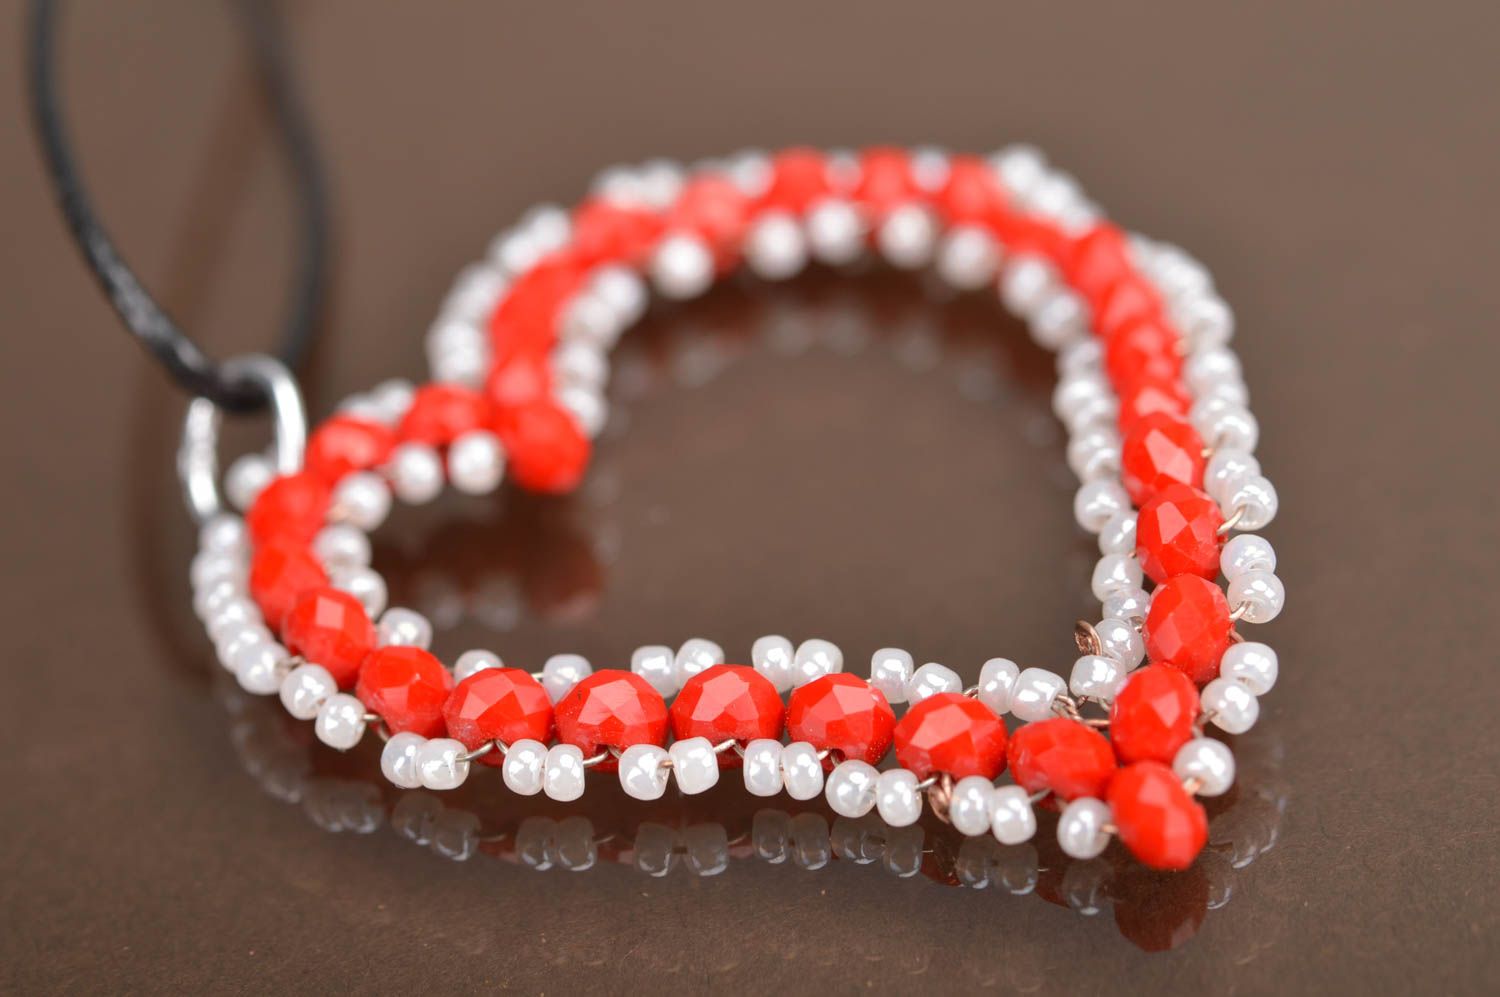 Handmade designer red heart shaped pendant with Czech crystal beads on cord photo 4